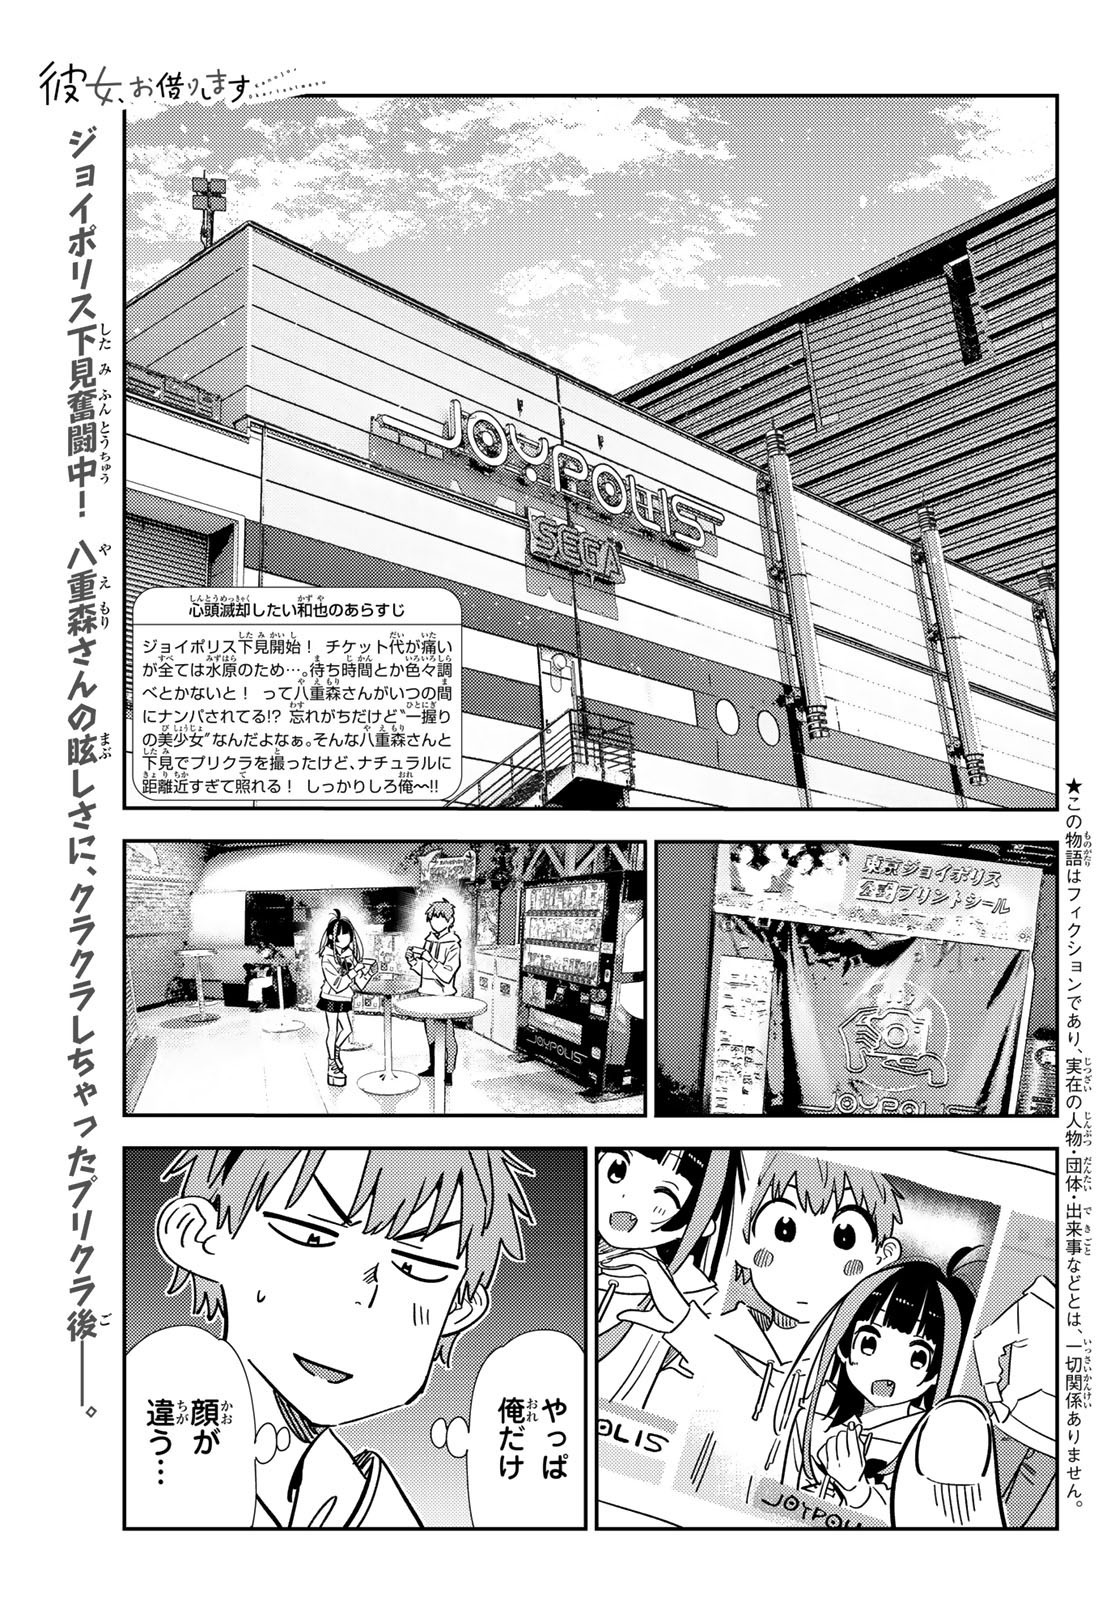 Weekly Shōnen Magazine - 週刊少年マガジン - Chapter 2024-34 - Page 12